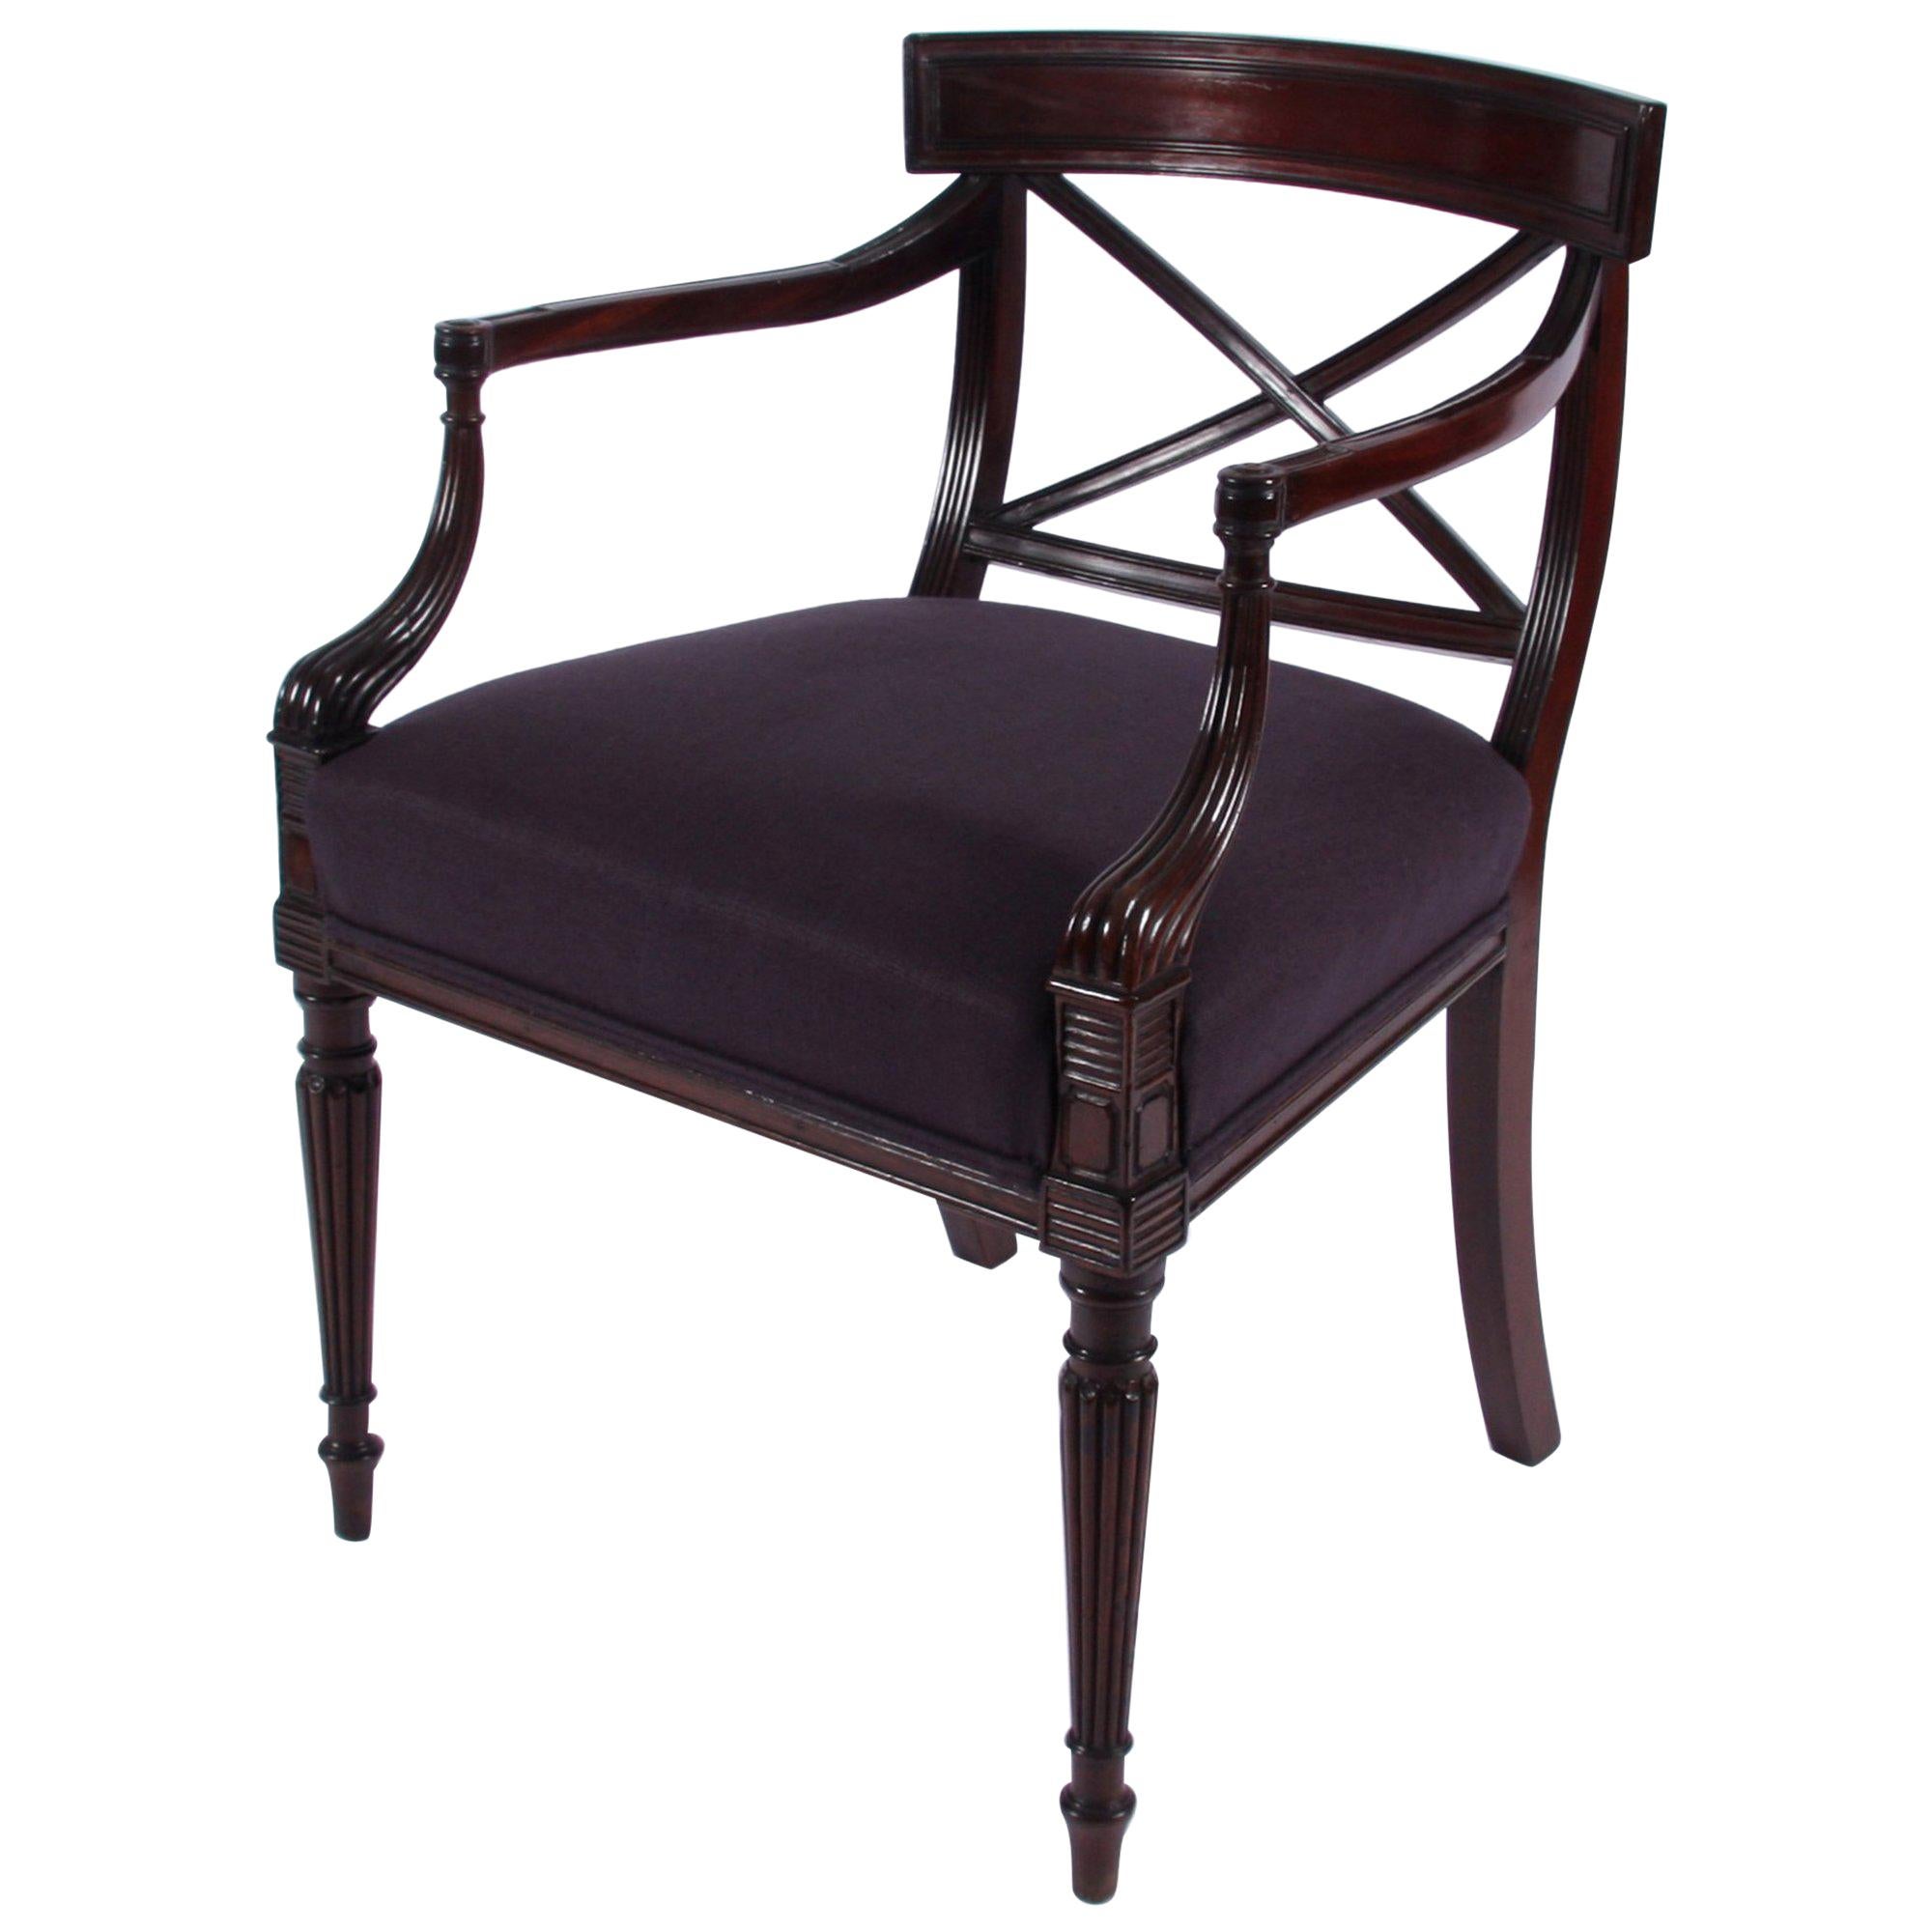 English Regency Single Reeded Mahogany Chair with Purple Fabric Seat